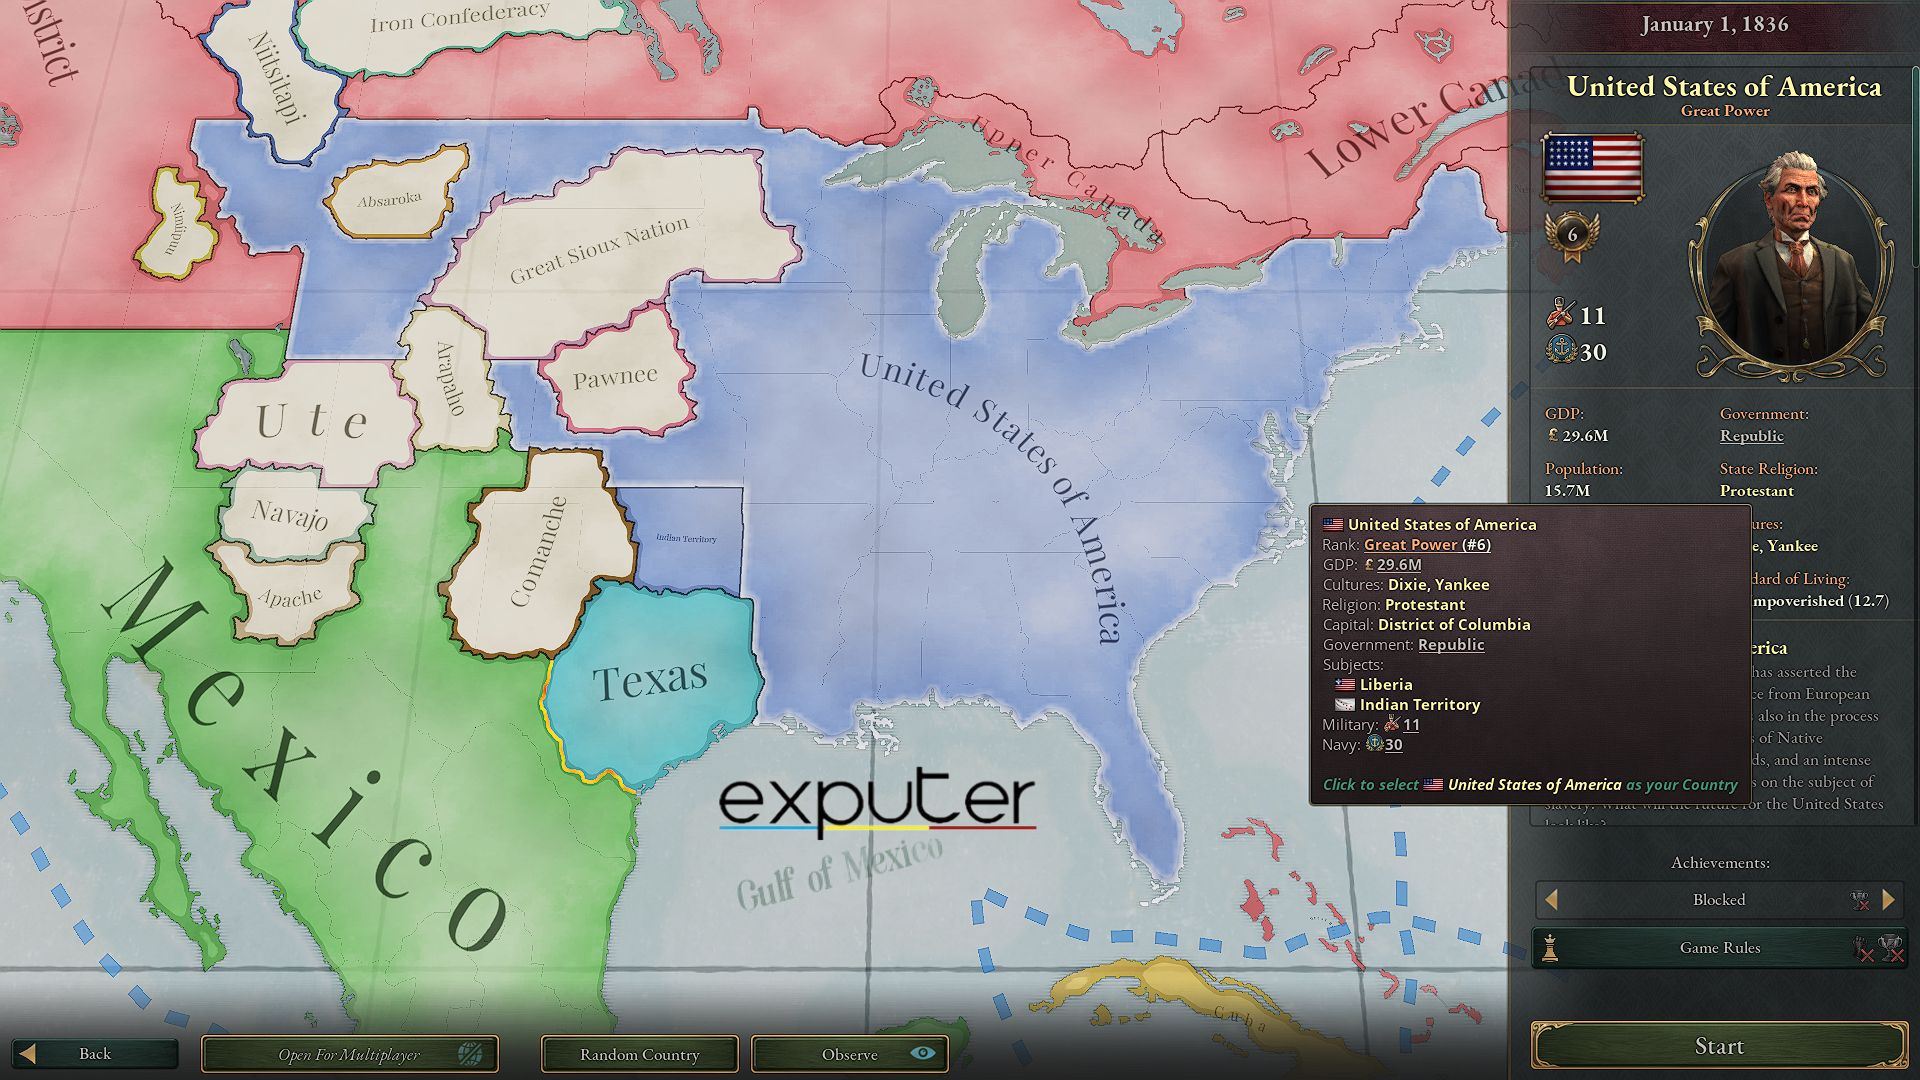 Best Starting Victoria 3 nations is united states.